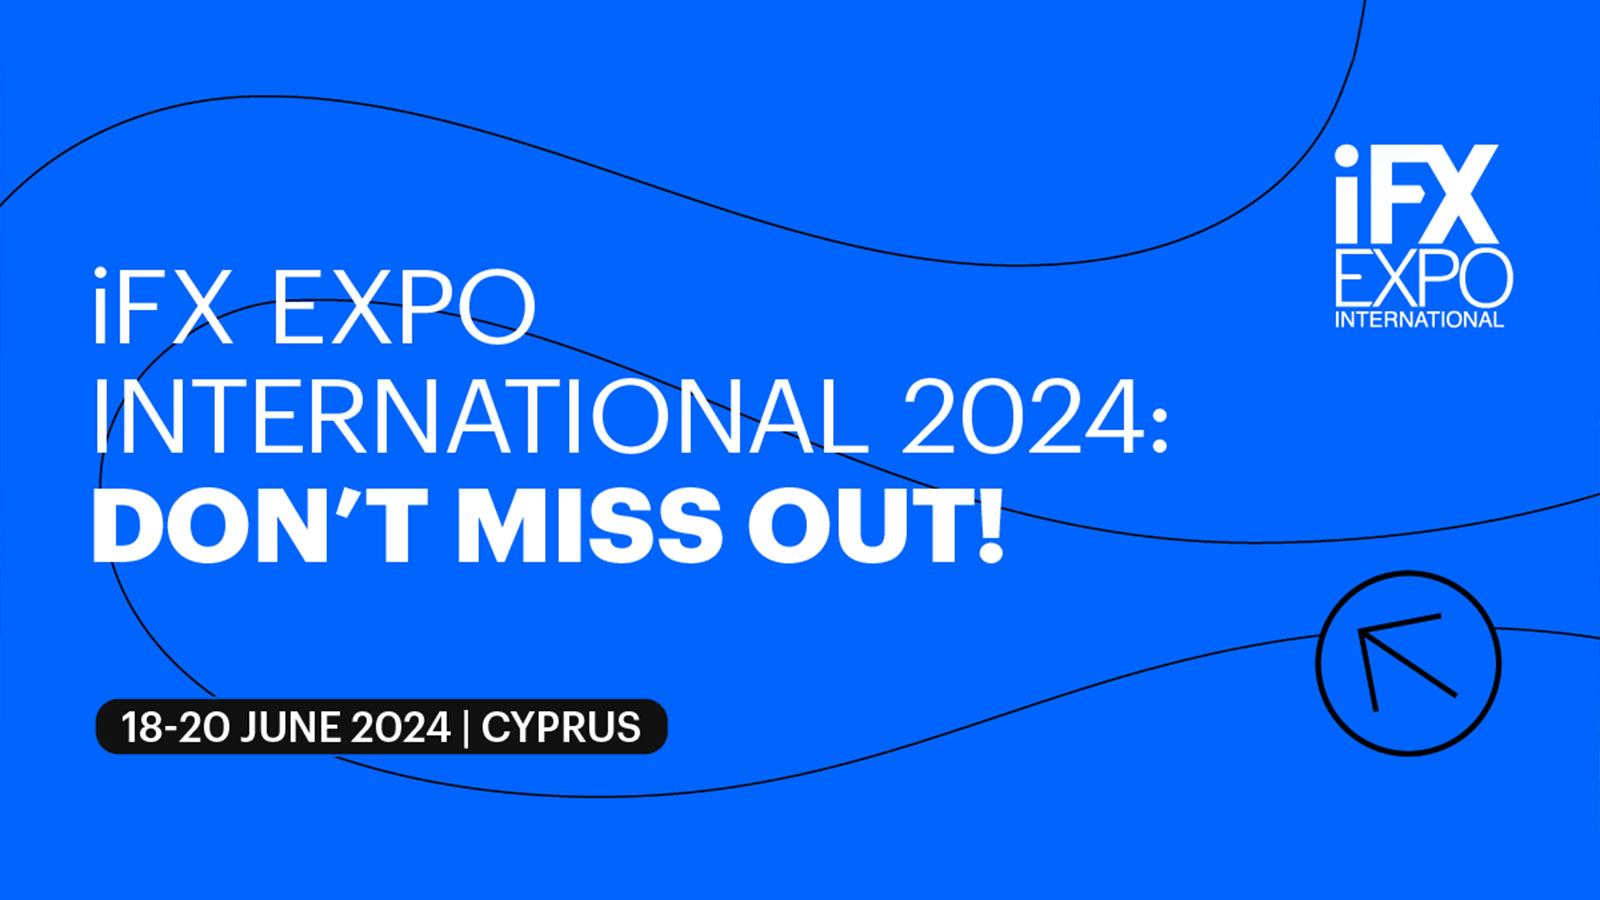 iFX EXPO International 2024: Don’t Miss Out